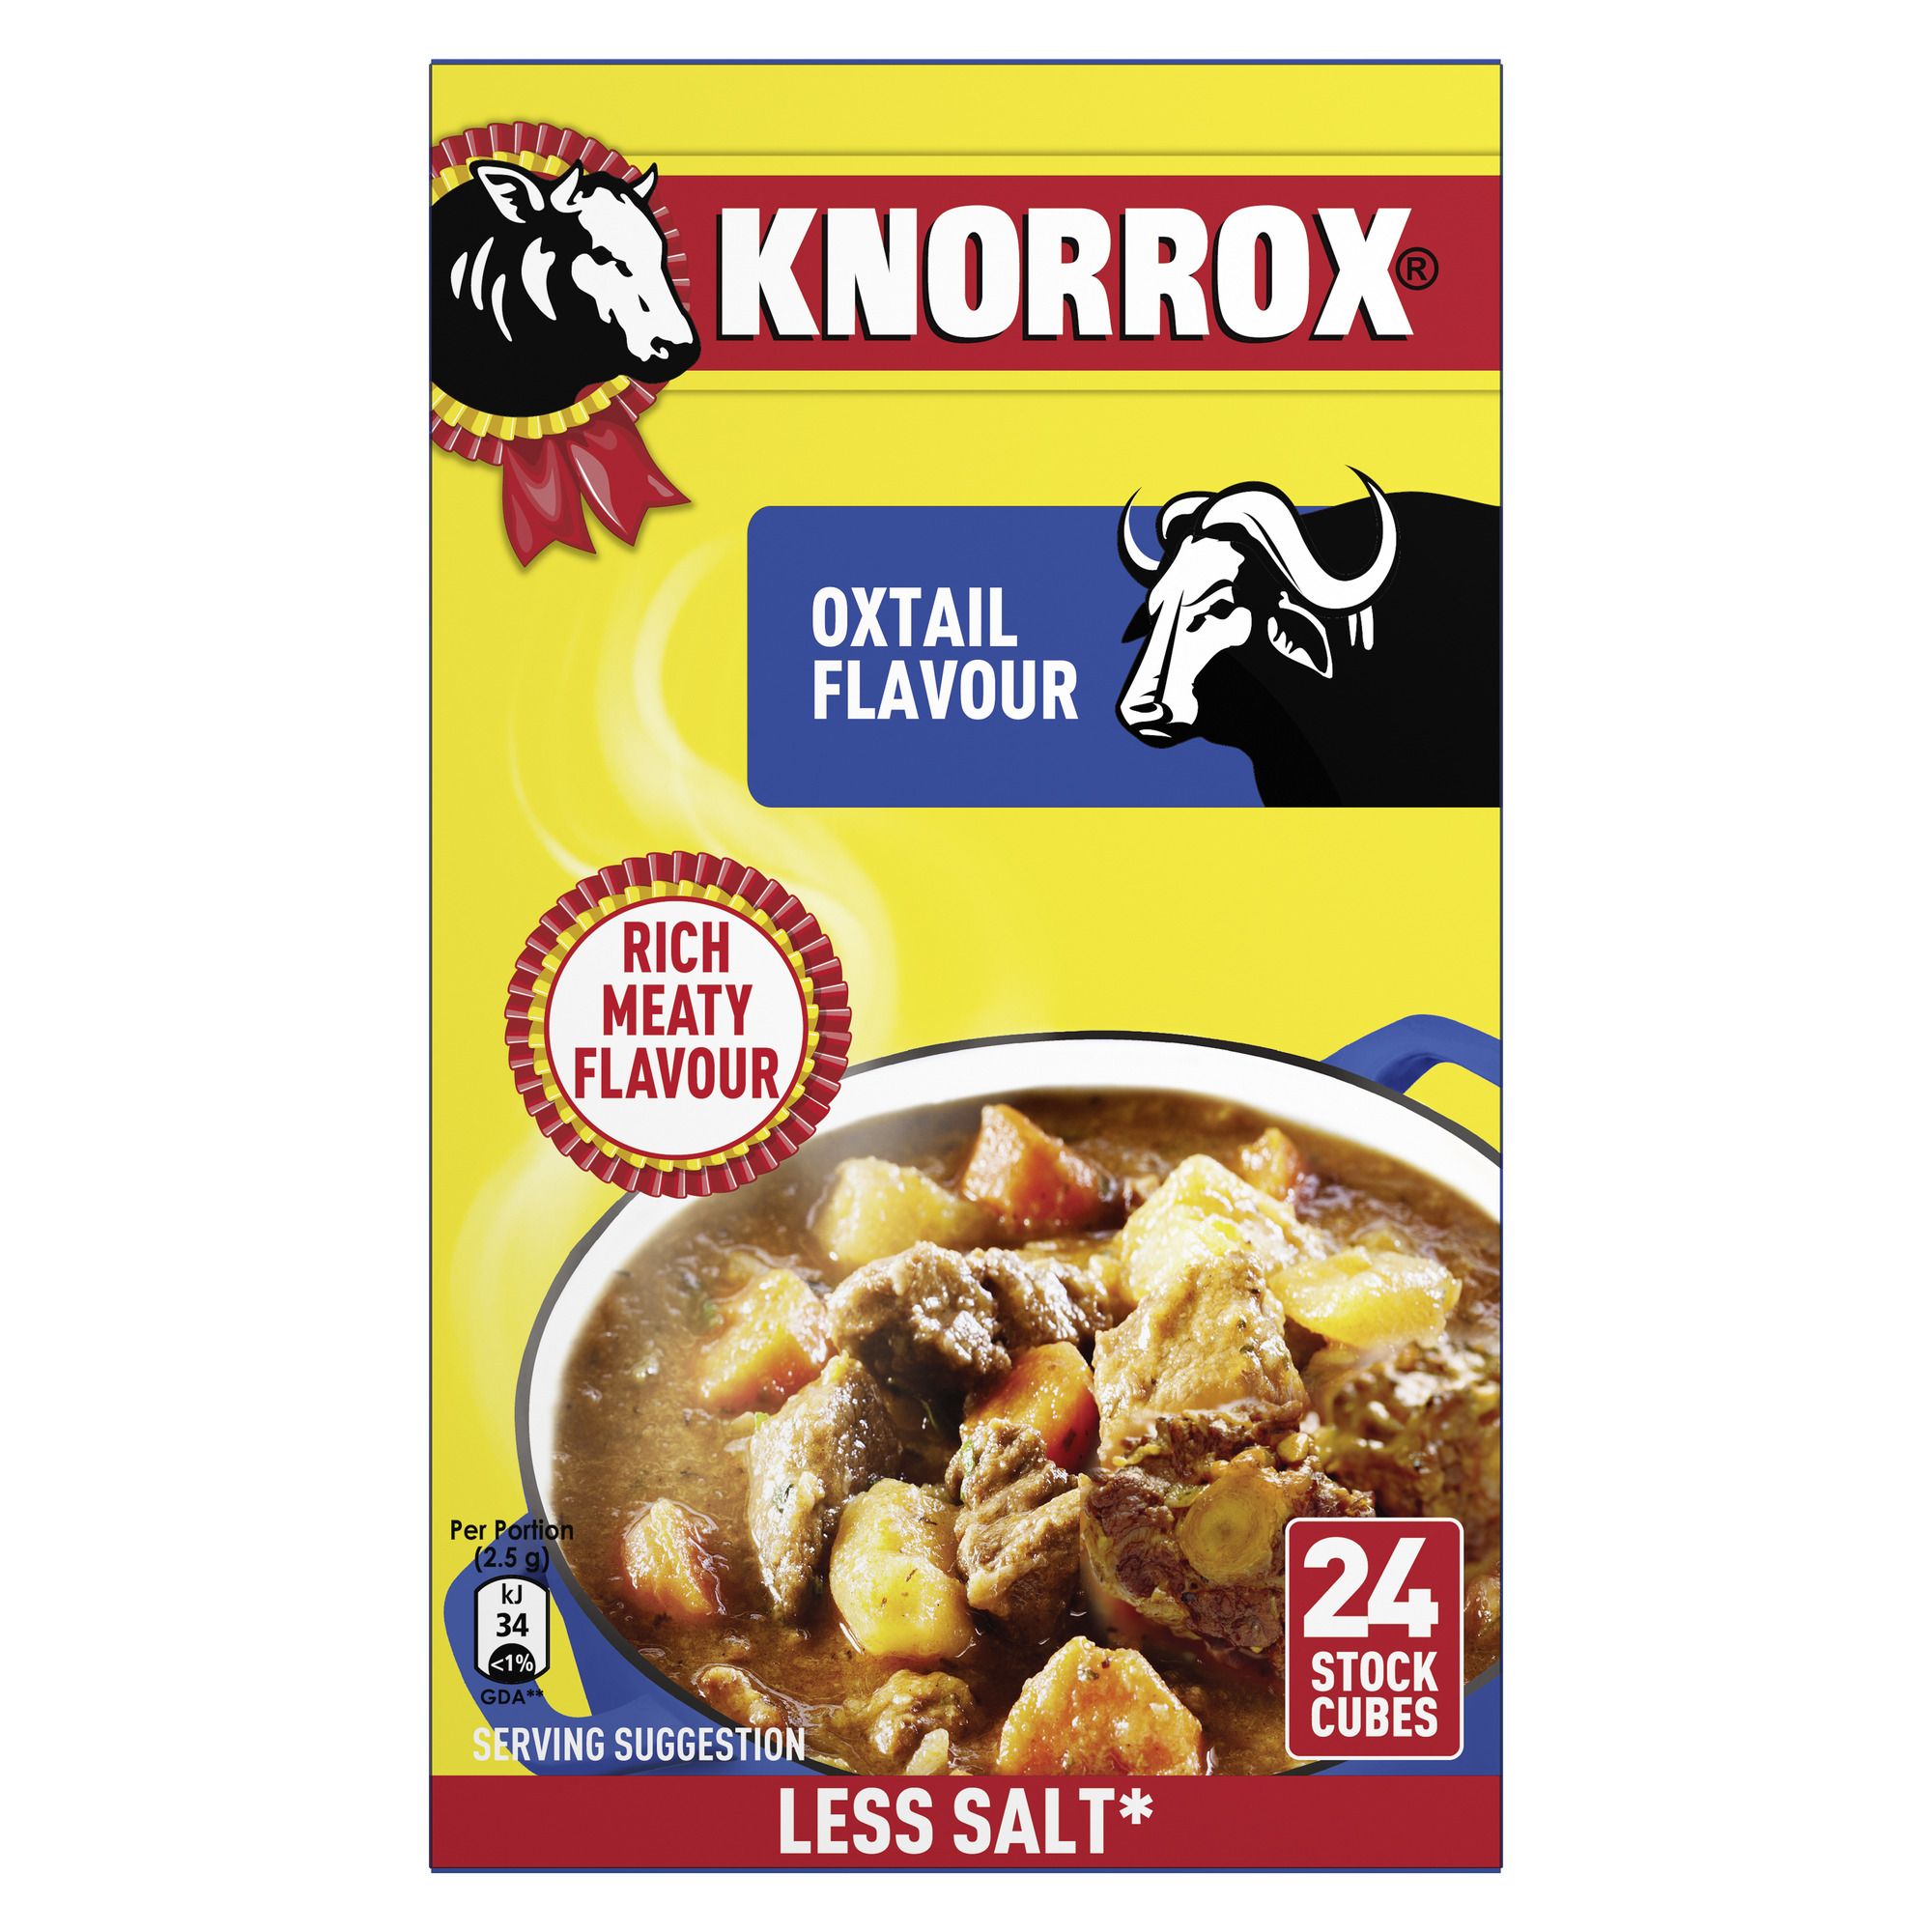 Knorrox Oxtail Stock Cubes 24